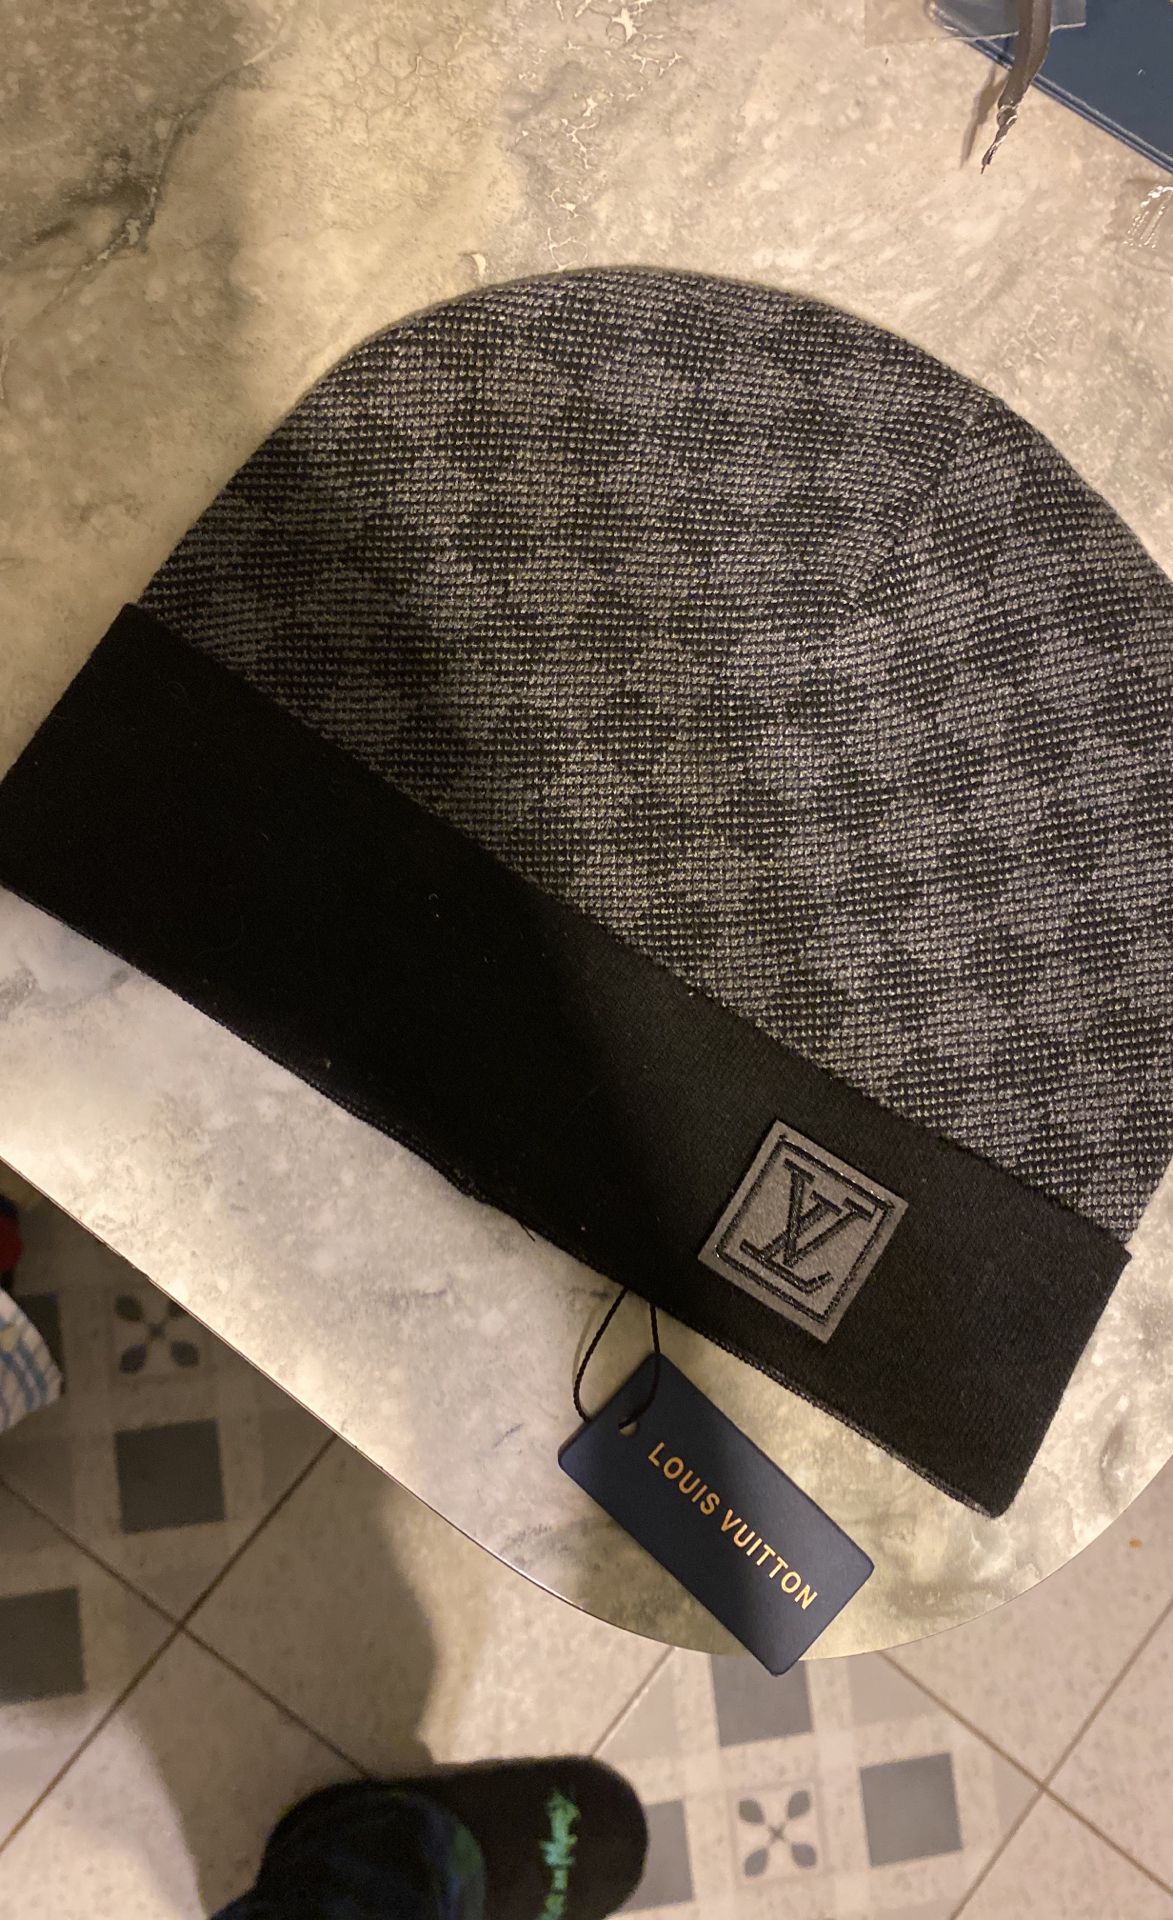 LV Beanie Grey Shipping Only for Sale in New Britain, CT - OfferUp